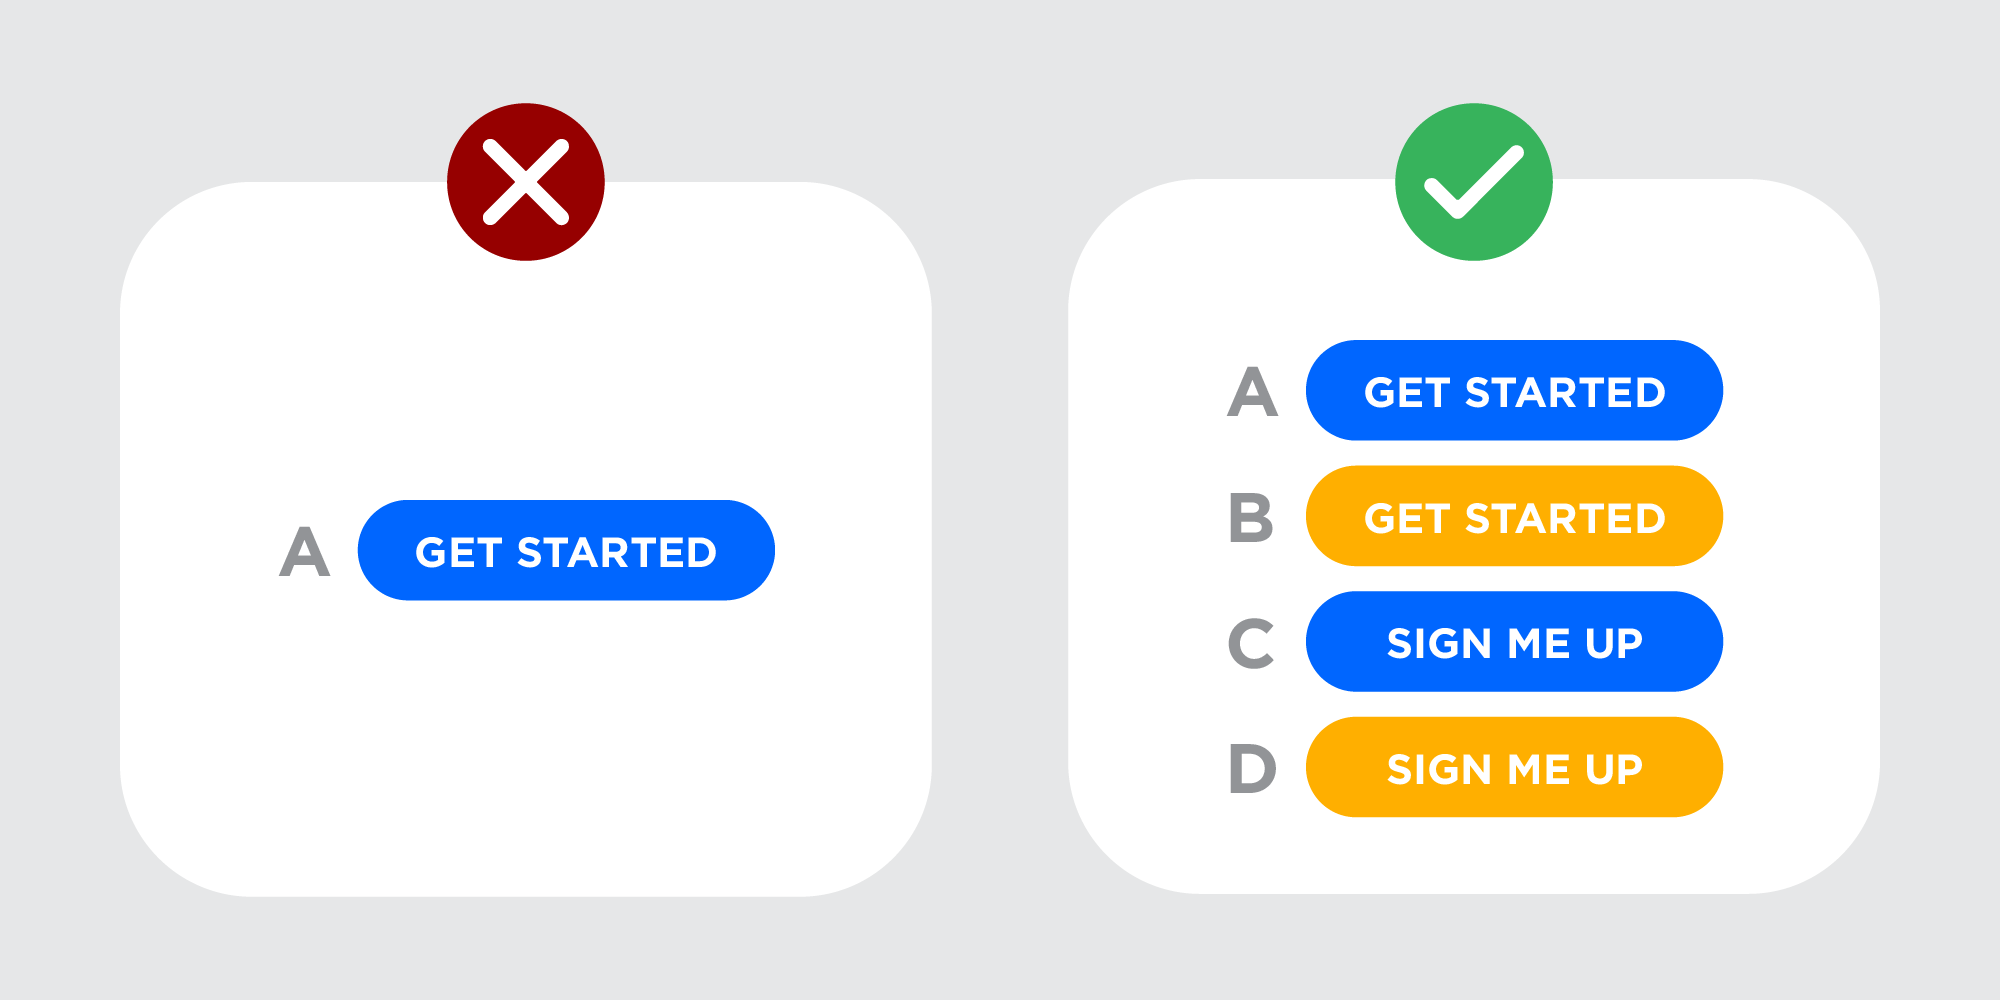 You can run an A/B test to make sure your CTA is in the right place